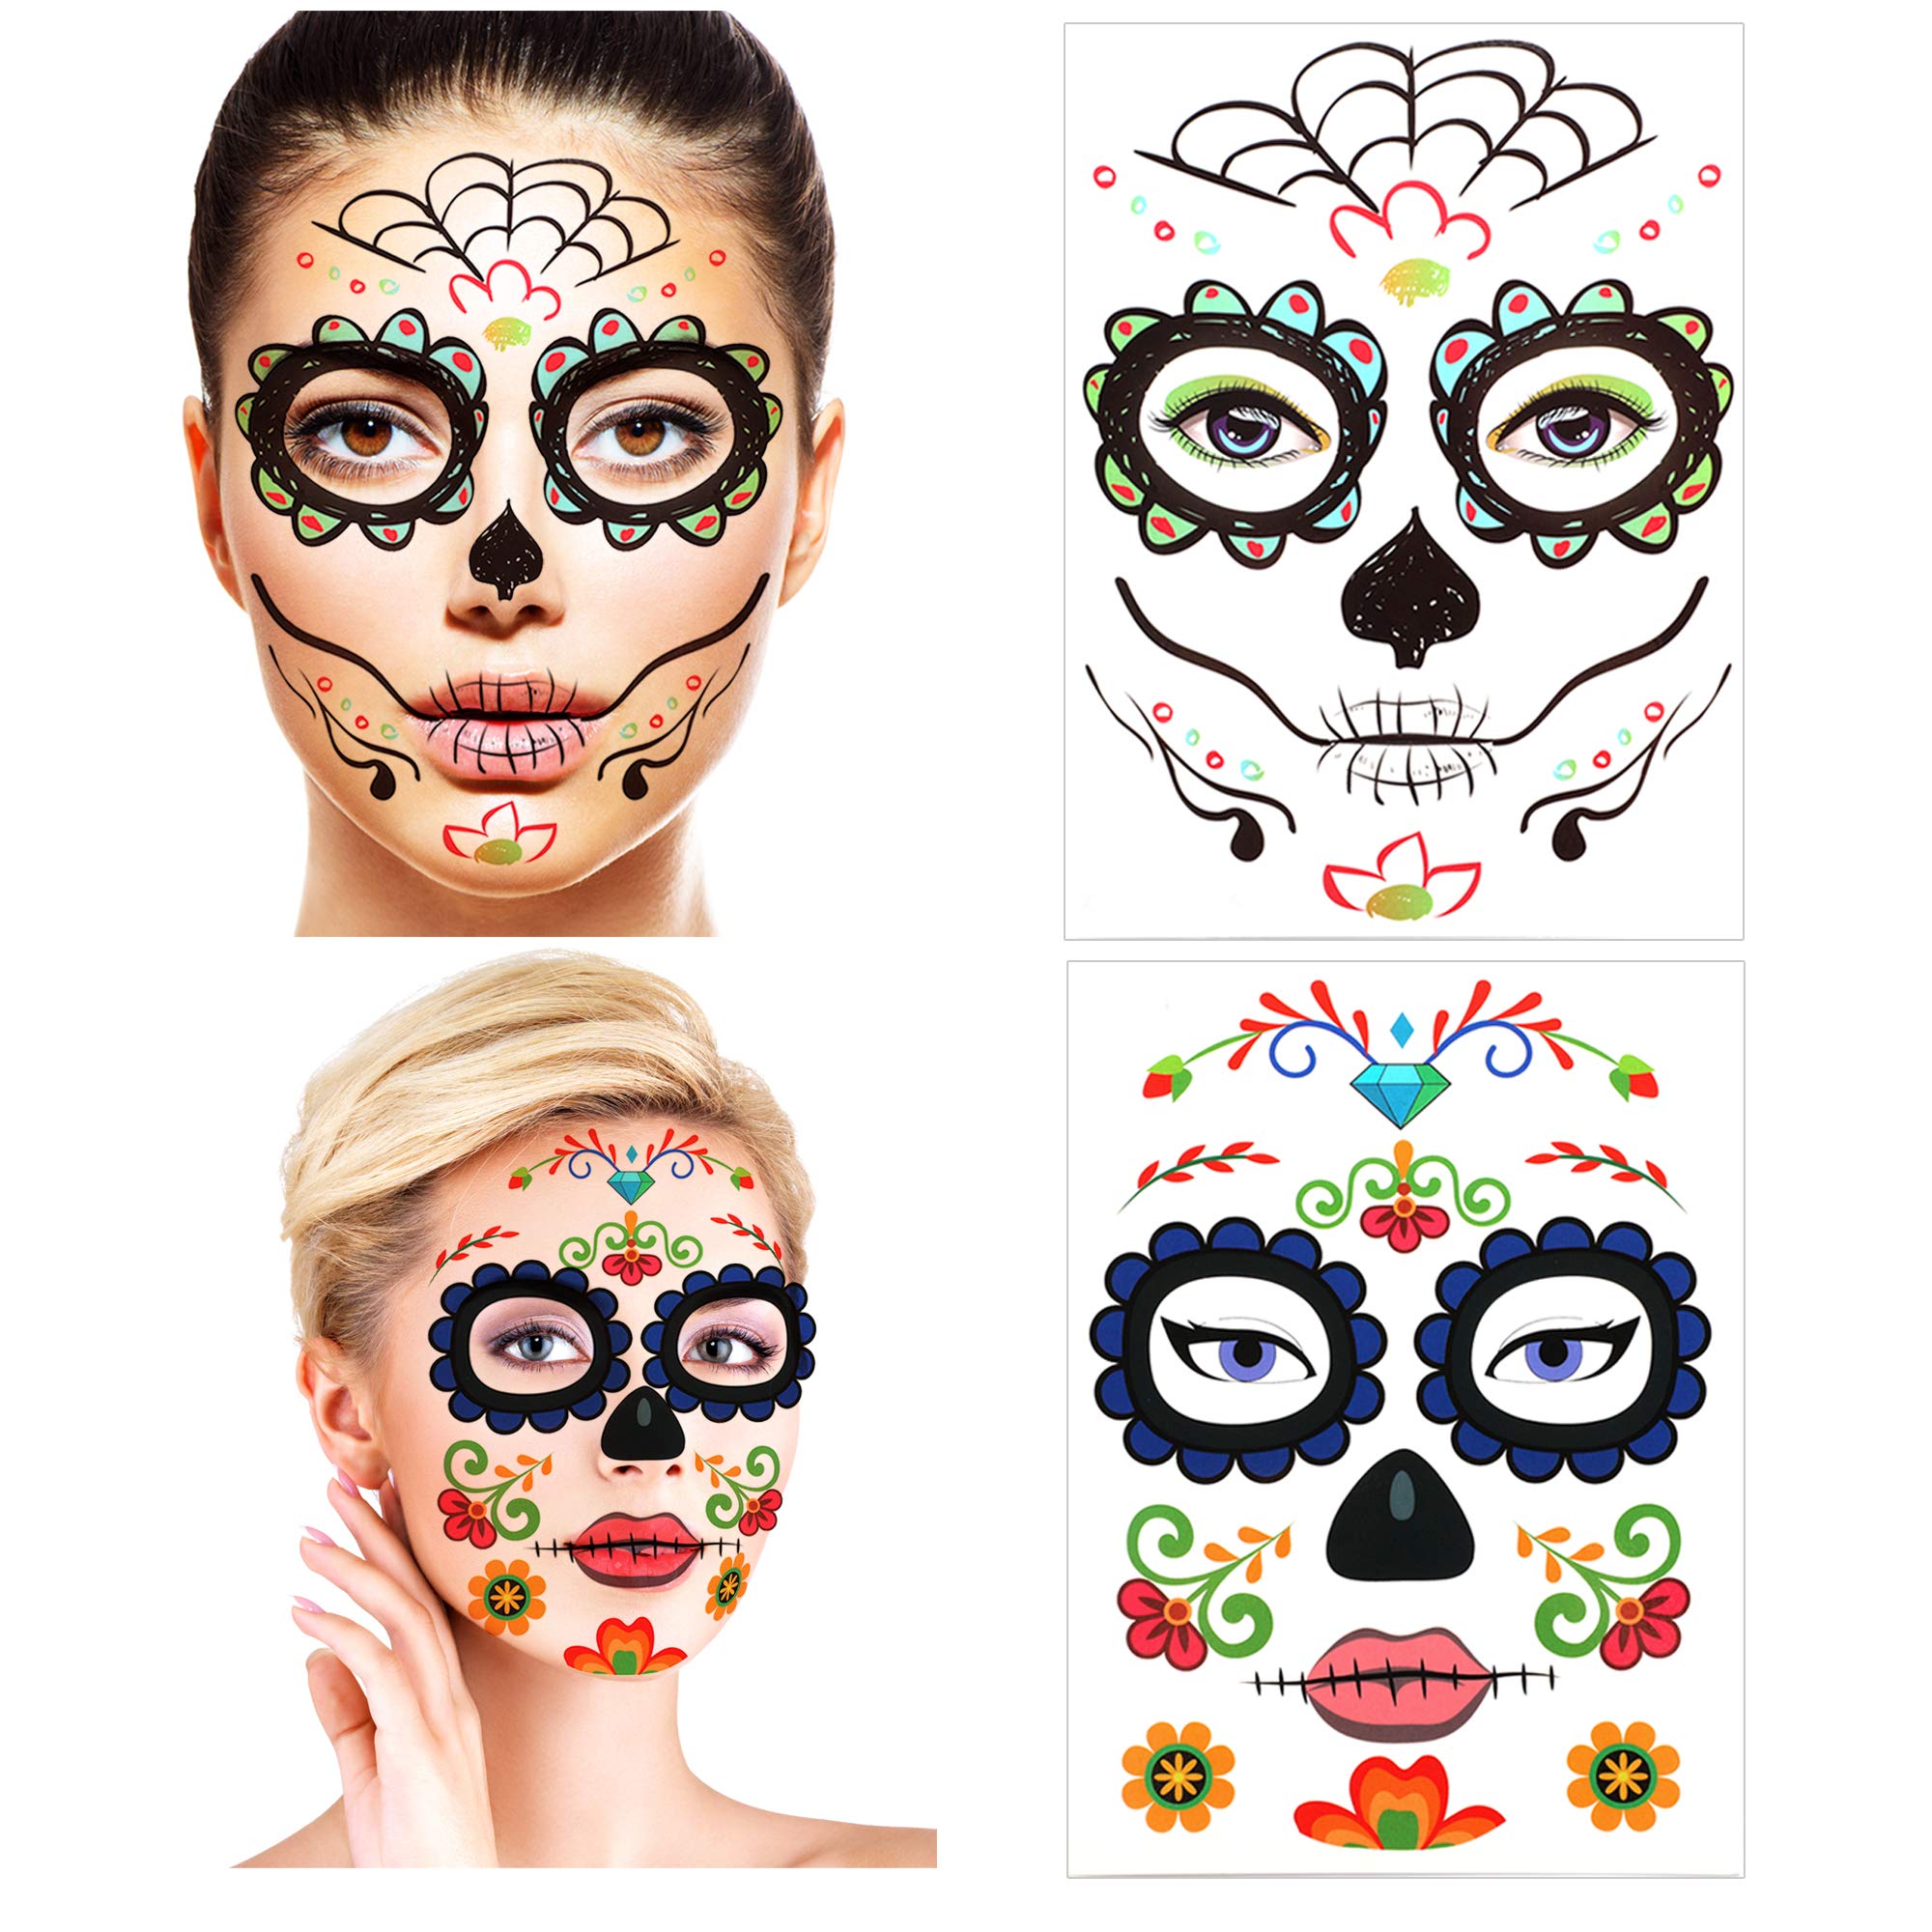 Halloween Temporary Face Tattoos (8Pack), Konsait Day of the Dead Sugar Skull Floral Black Skeleton Web Red Roses Full Face Mask Tattoo for Women Men Adult Kids Boys Halloween Party Favor Supplies